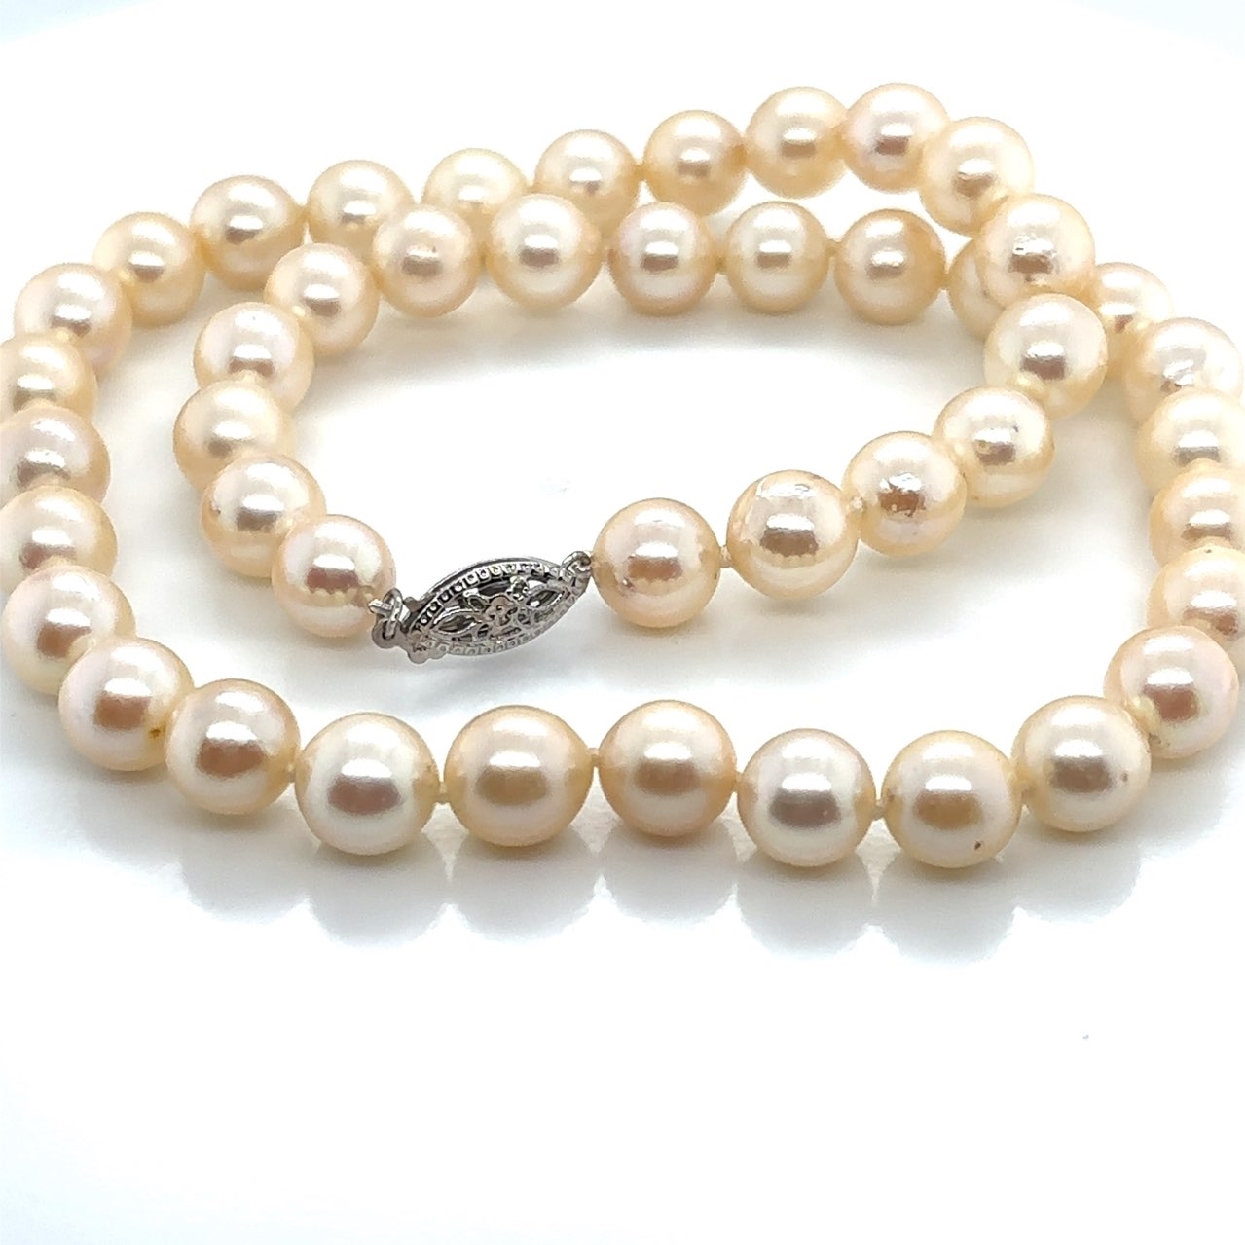 14K White Gold Clasp on a 15 Inch Strand of 7.8mm Off-White Pearls